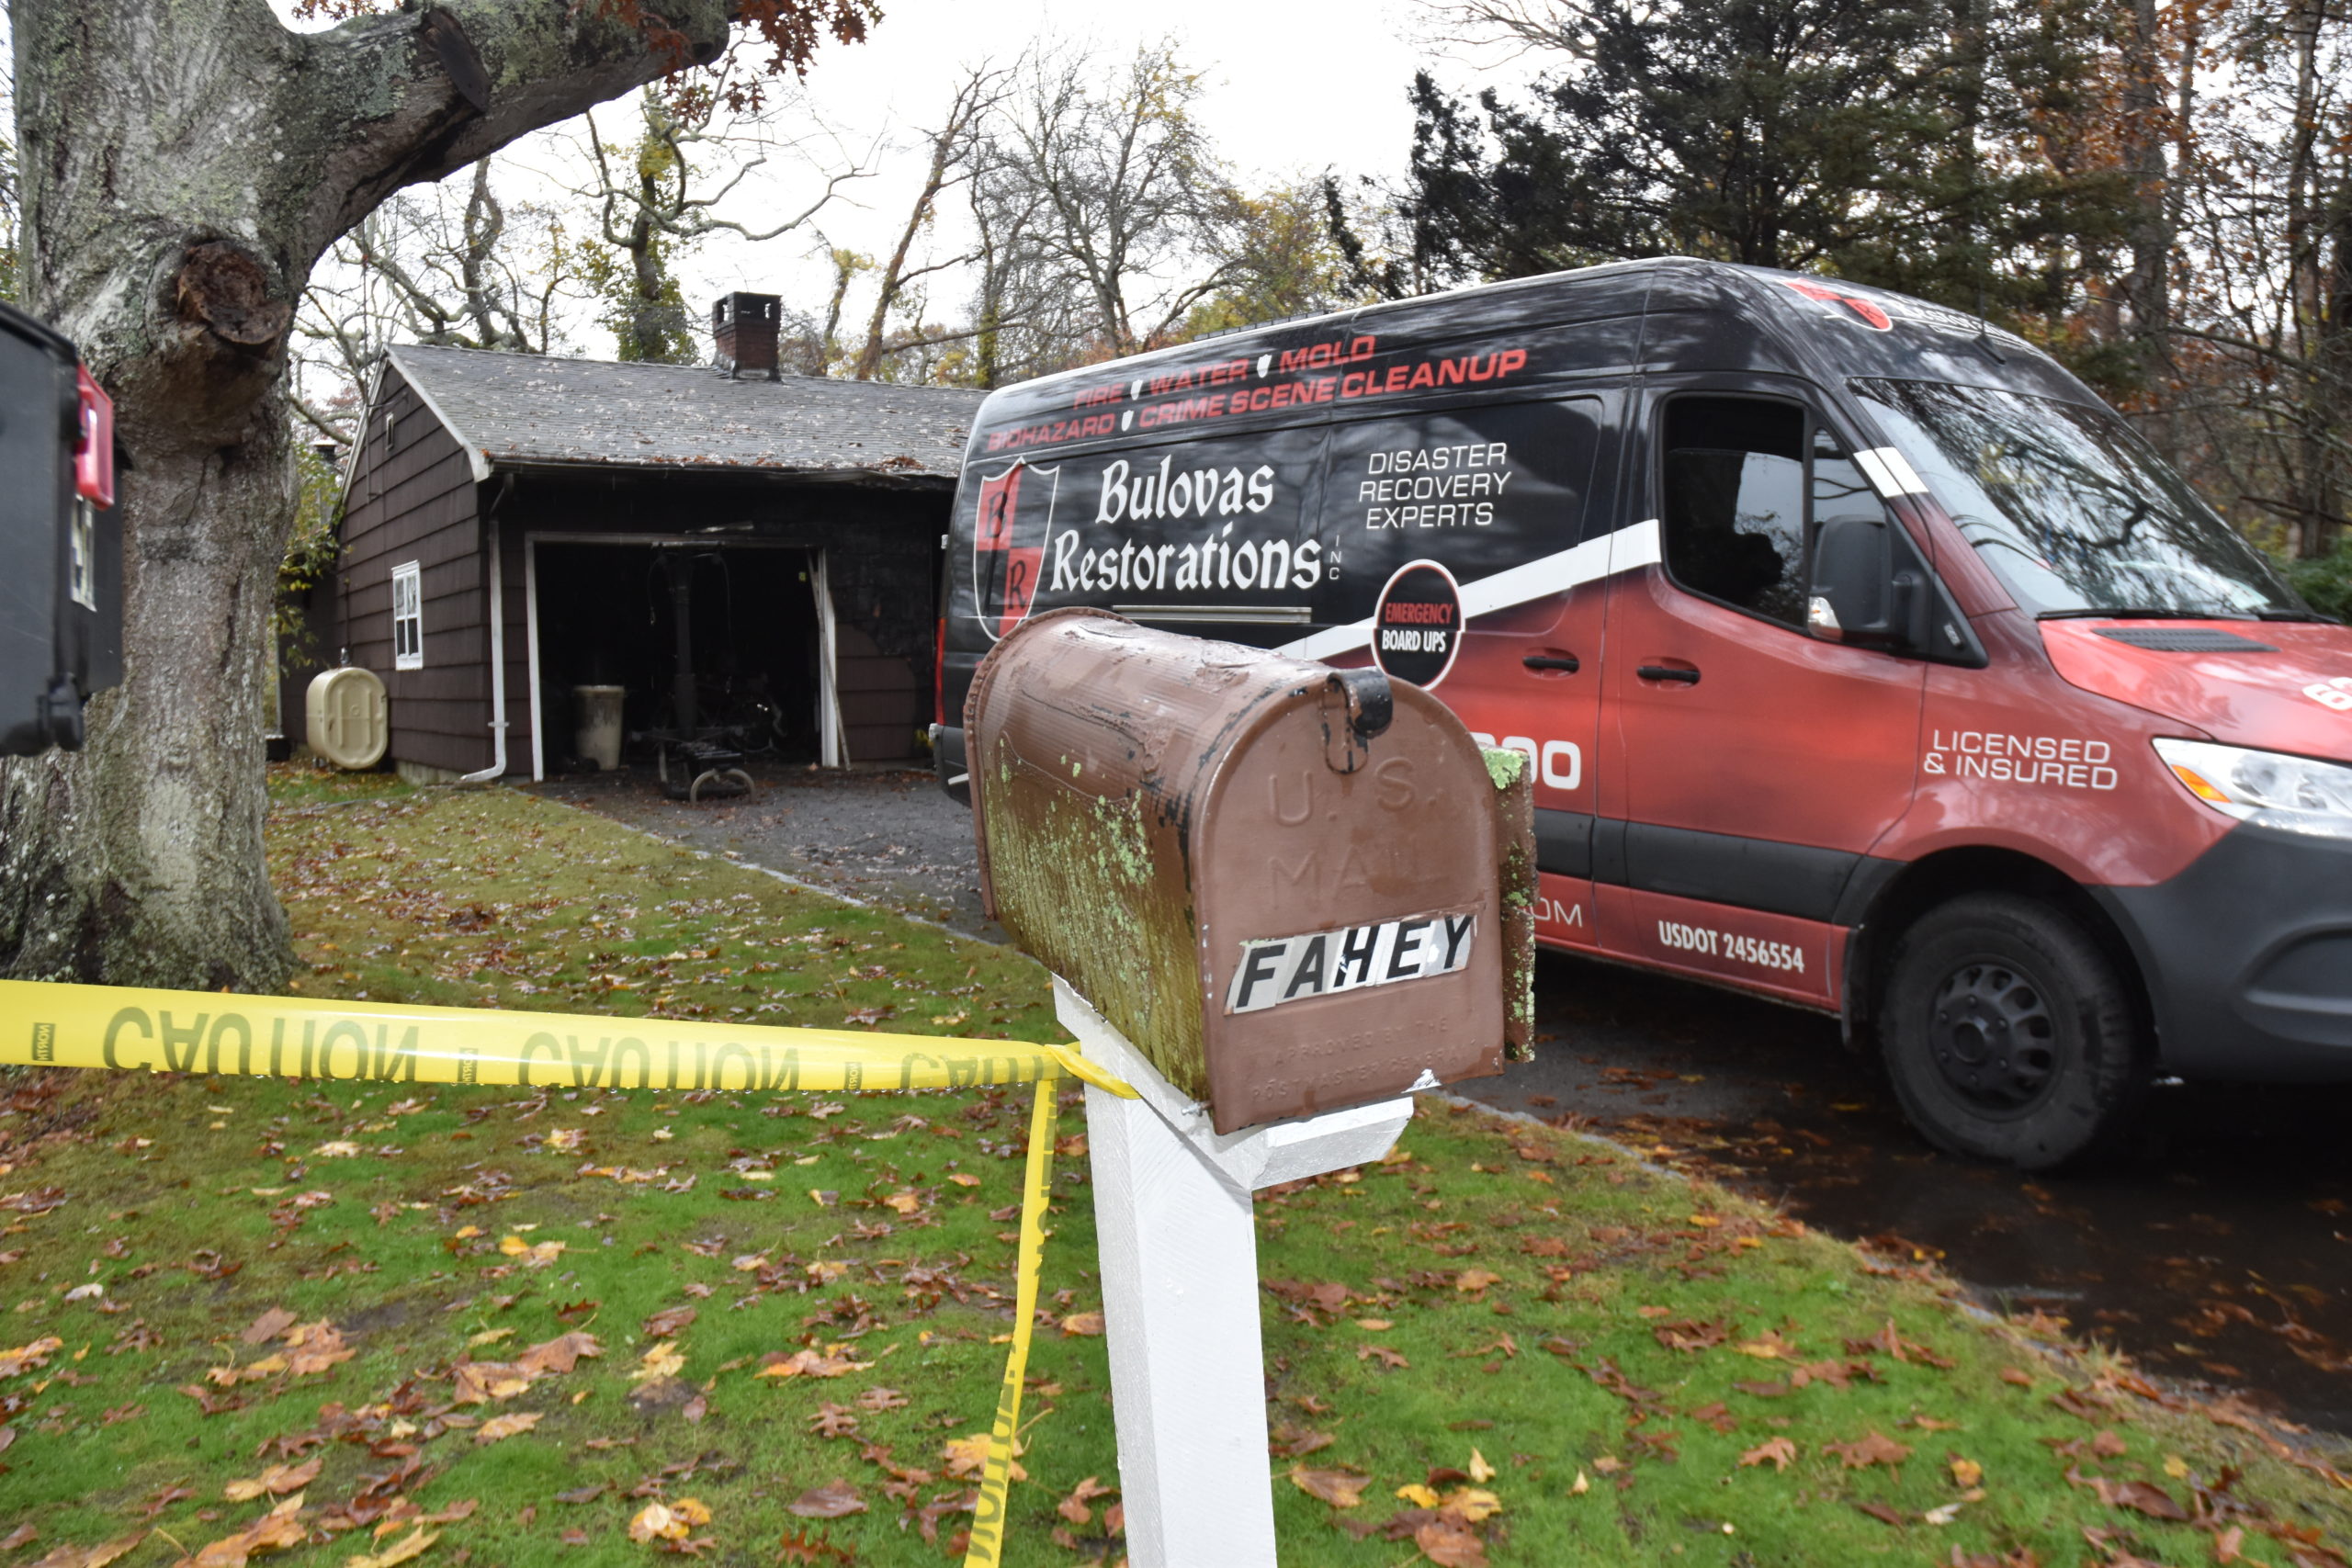 A fire restoration service was at the scene Friday of a fatal fire on Peconic Bay Avenue in North Sea that killed John Fahey.